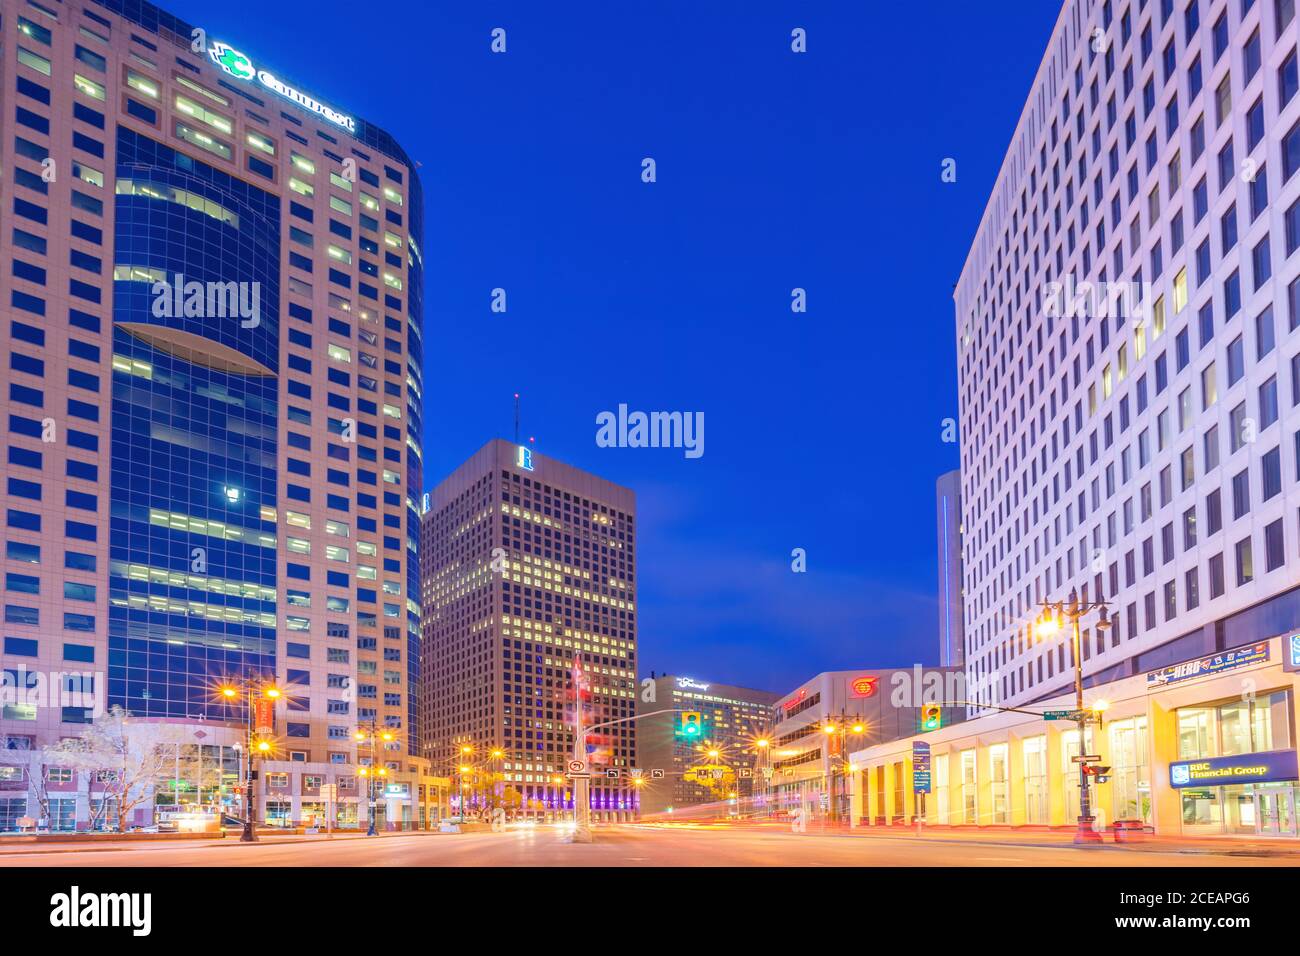 Office buildings in downtown Winnipeg Manitoba Canada. Stock Photo